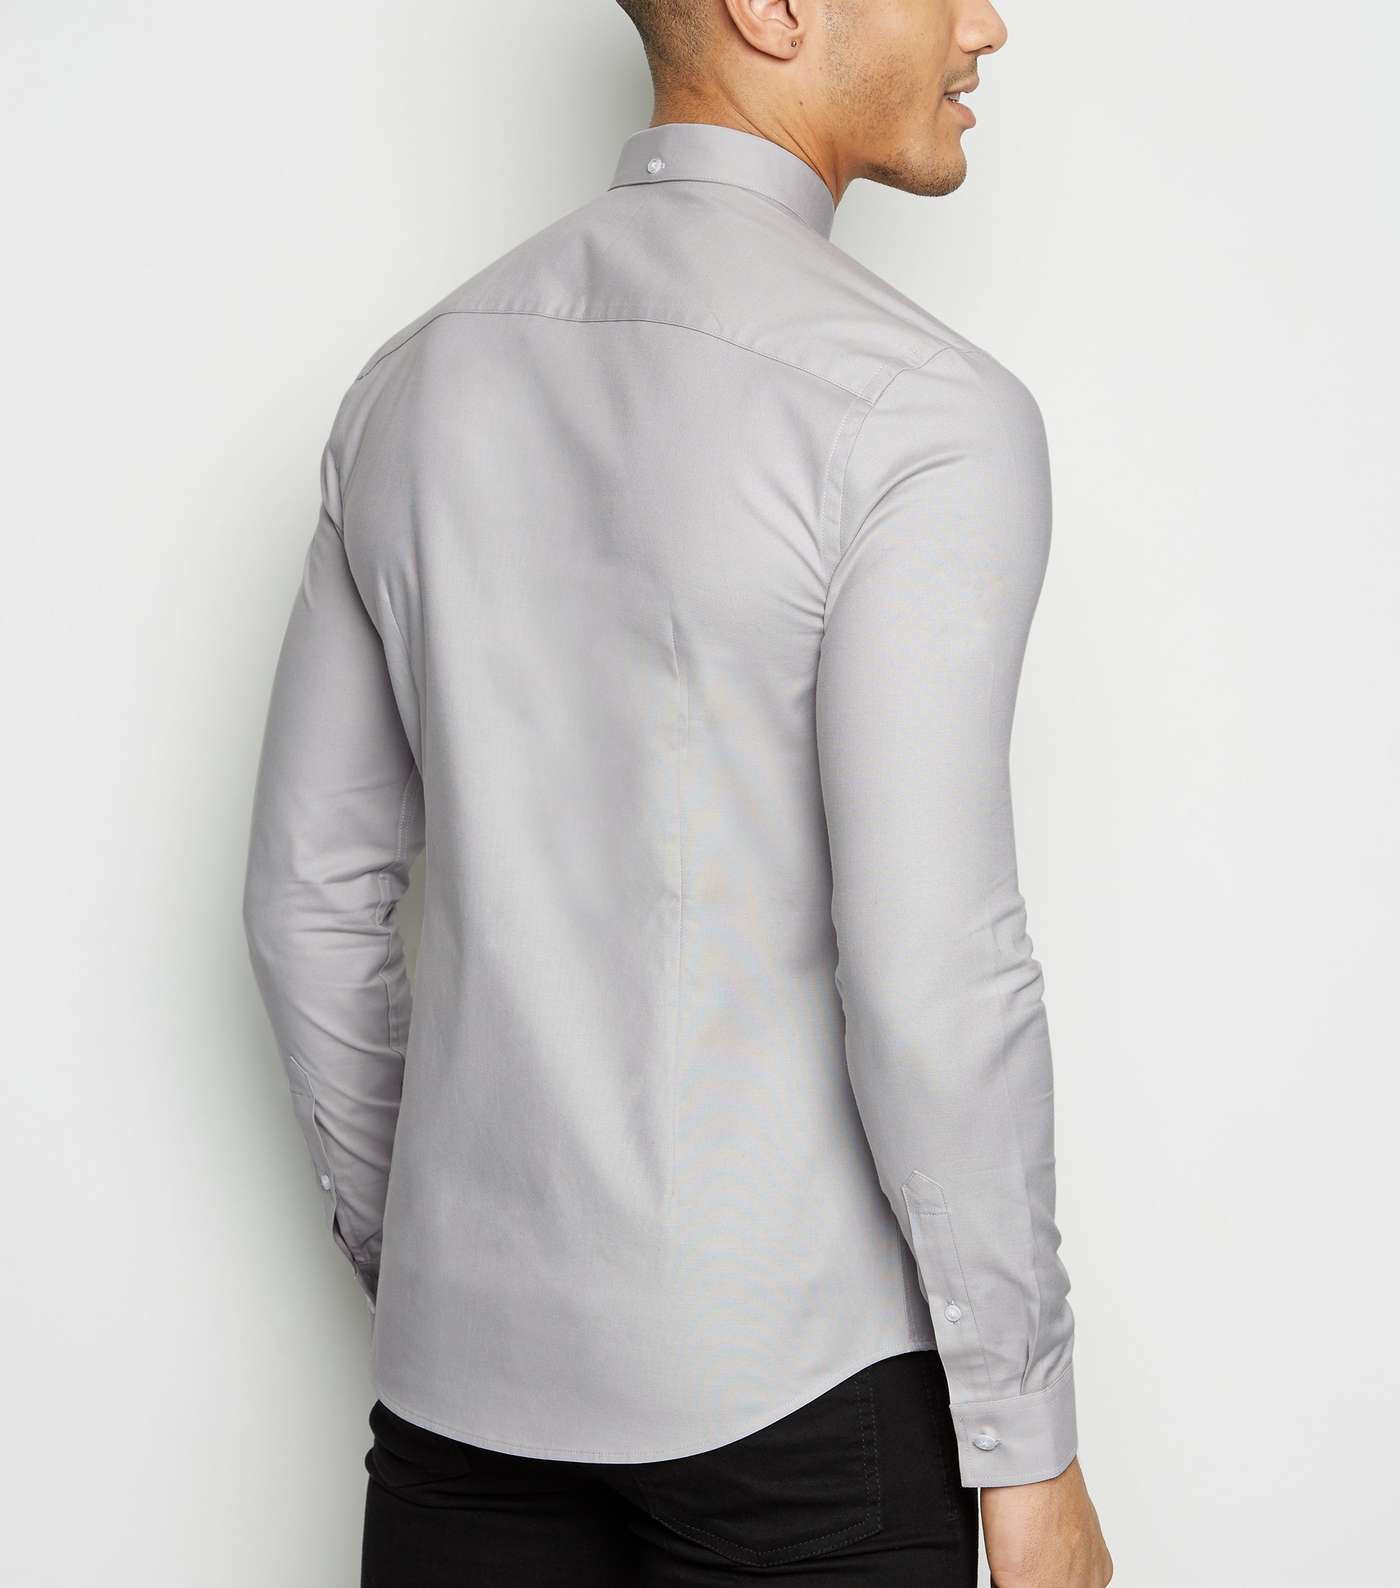 Pale Grey Muscle Fit Long Sleeve Oxford Shirt Image 3